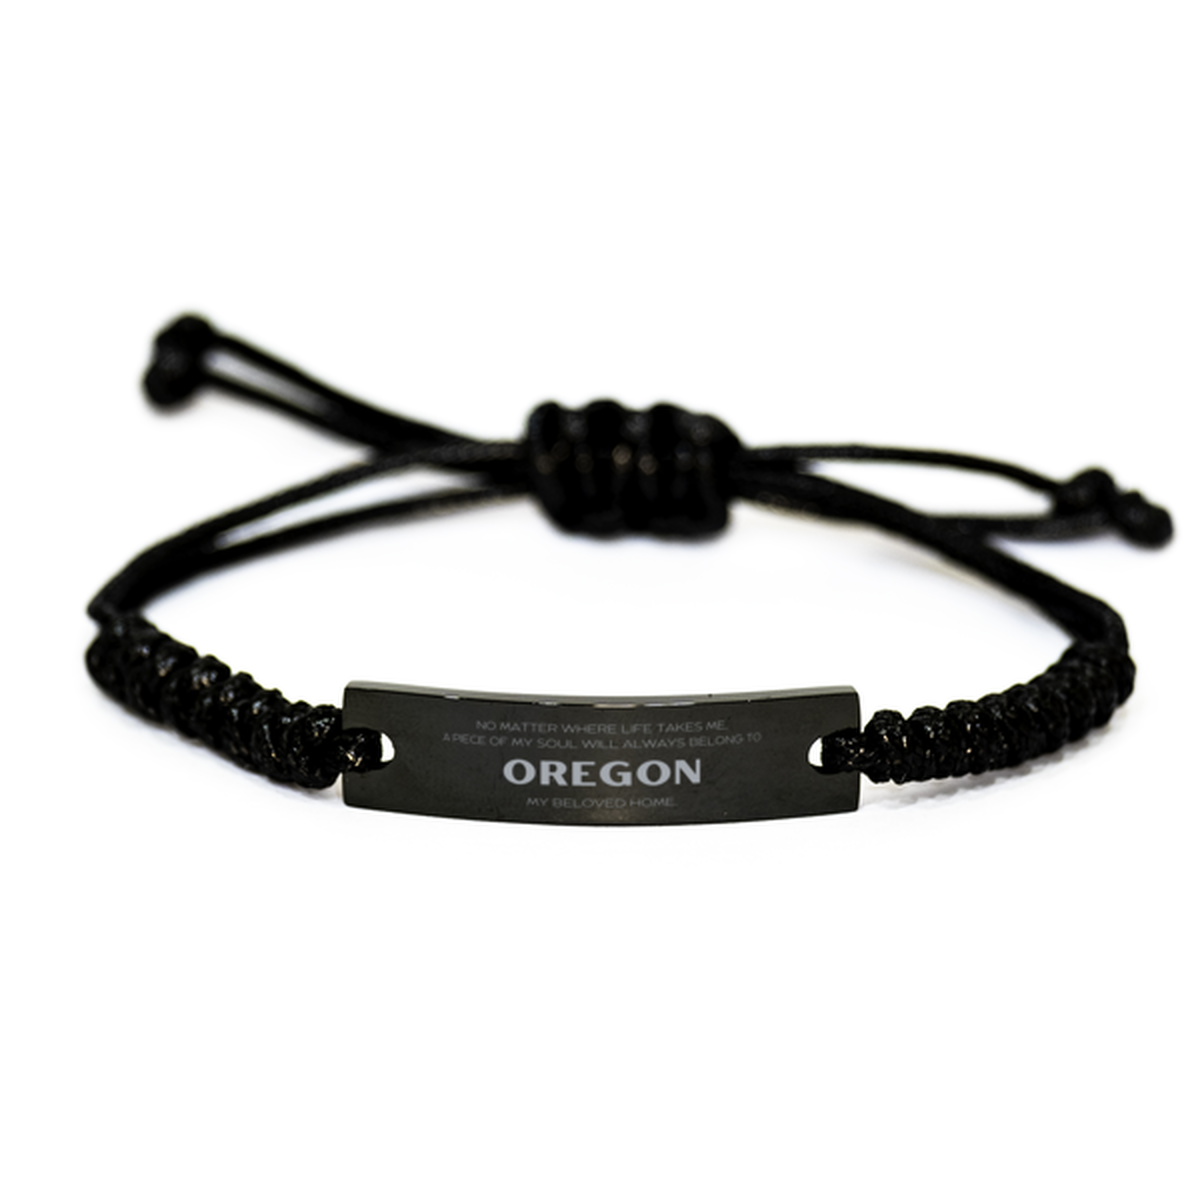 Love Oregon State Gifts, My soul will always belong to Oregon, Proud Black Rope Bracelet, Birthday Unique Gifts For Oregon Men, Women, Friends